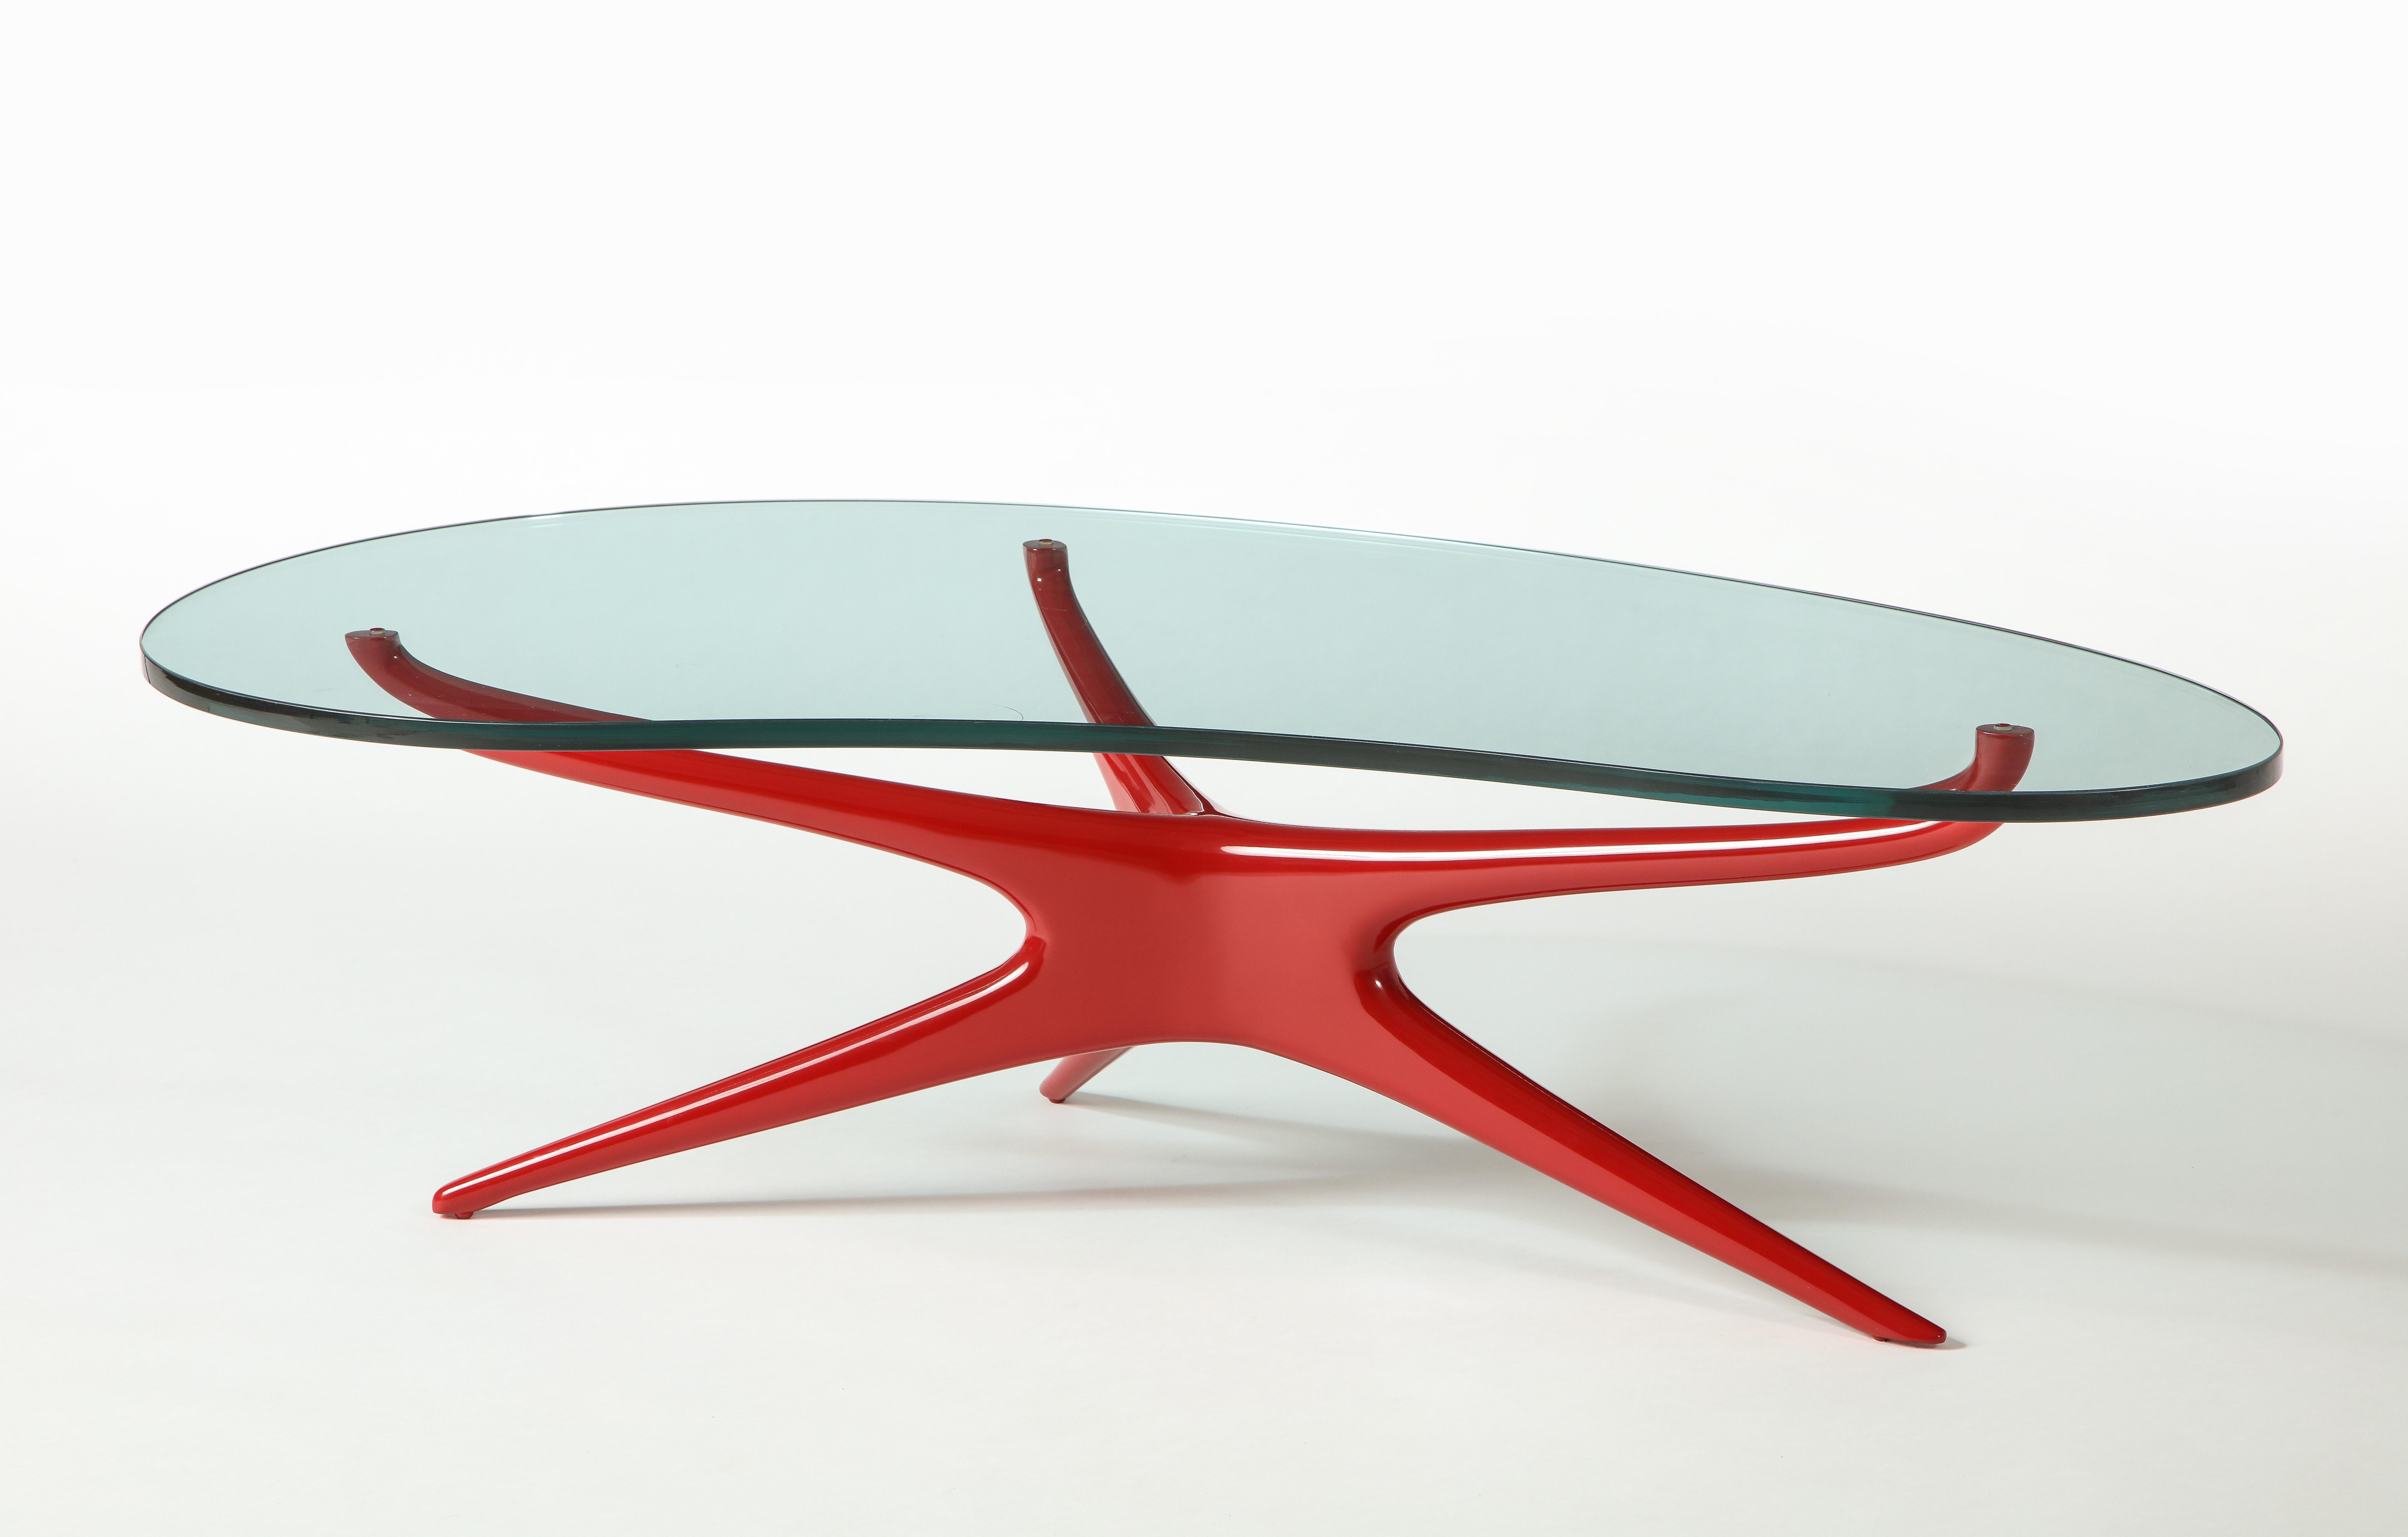 Lacquered Vladimir Kagan 412 Sculpted Coffee Table with Clear Glass Top & Red Lacquer Base